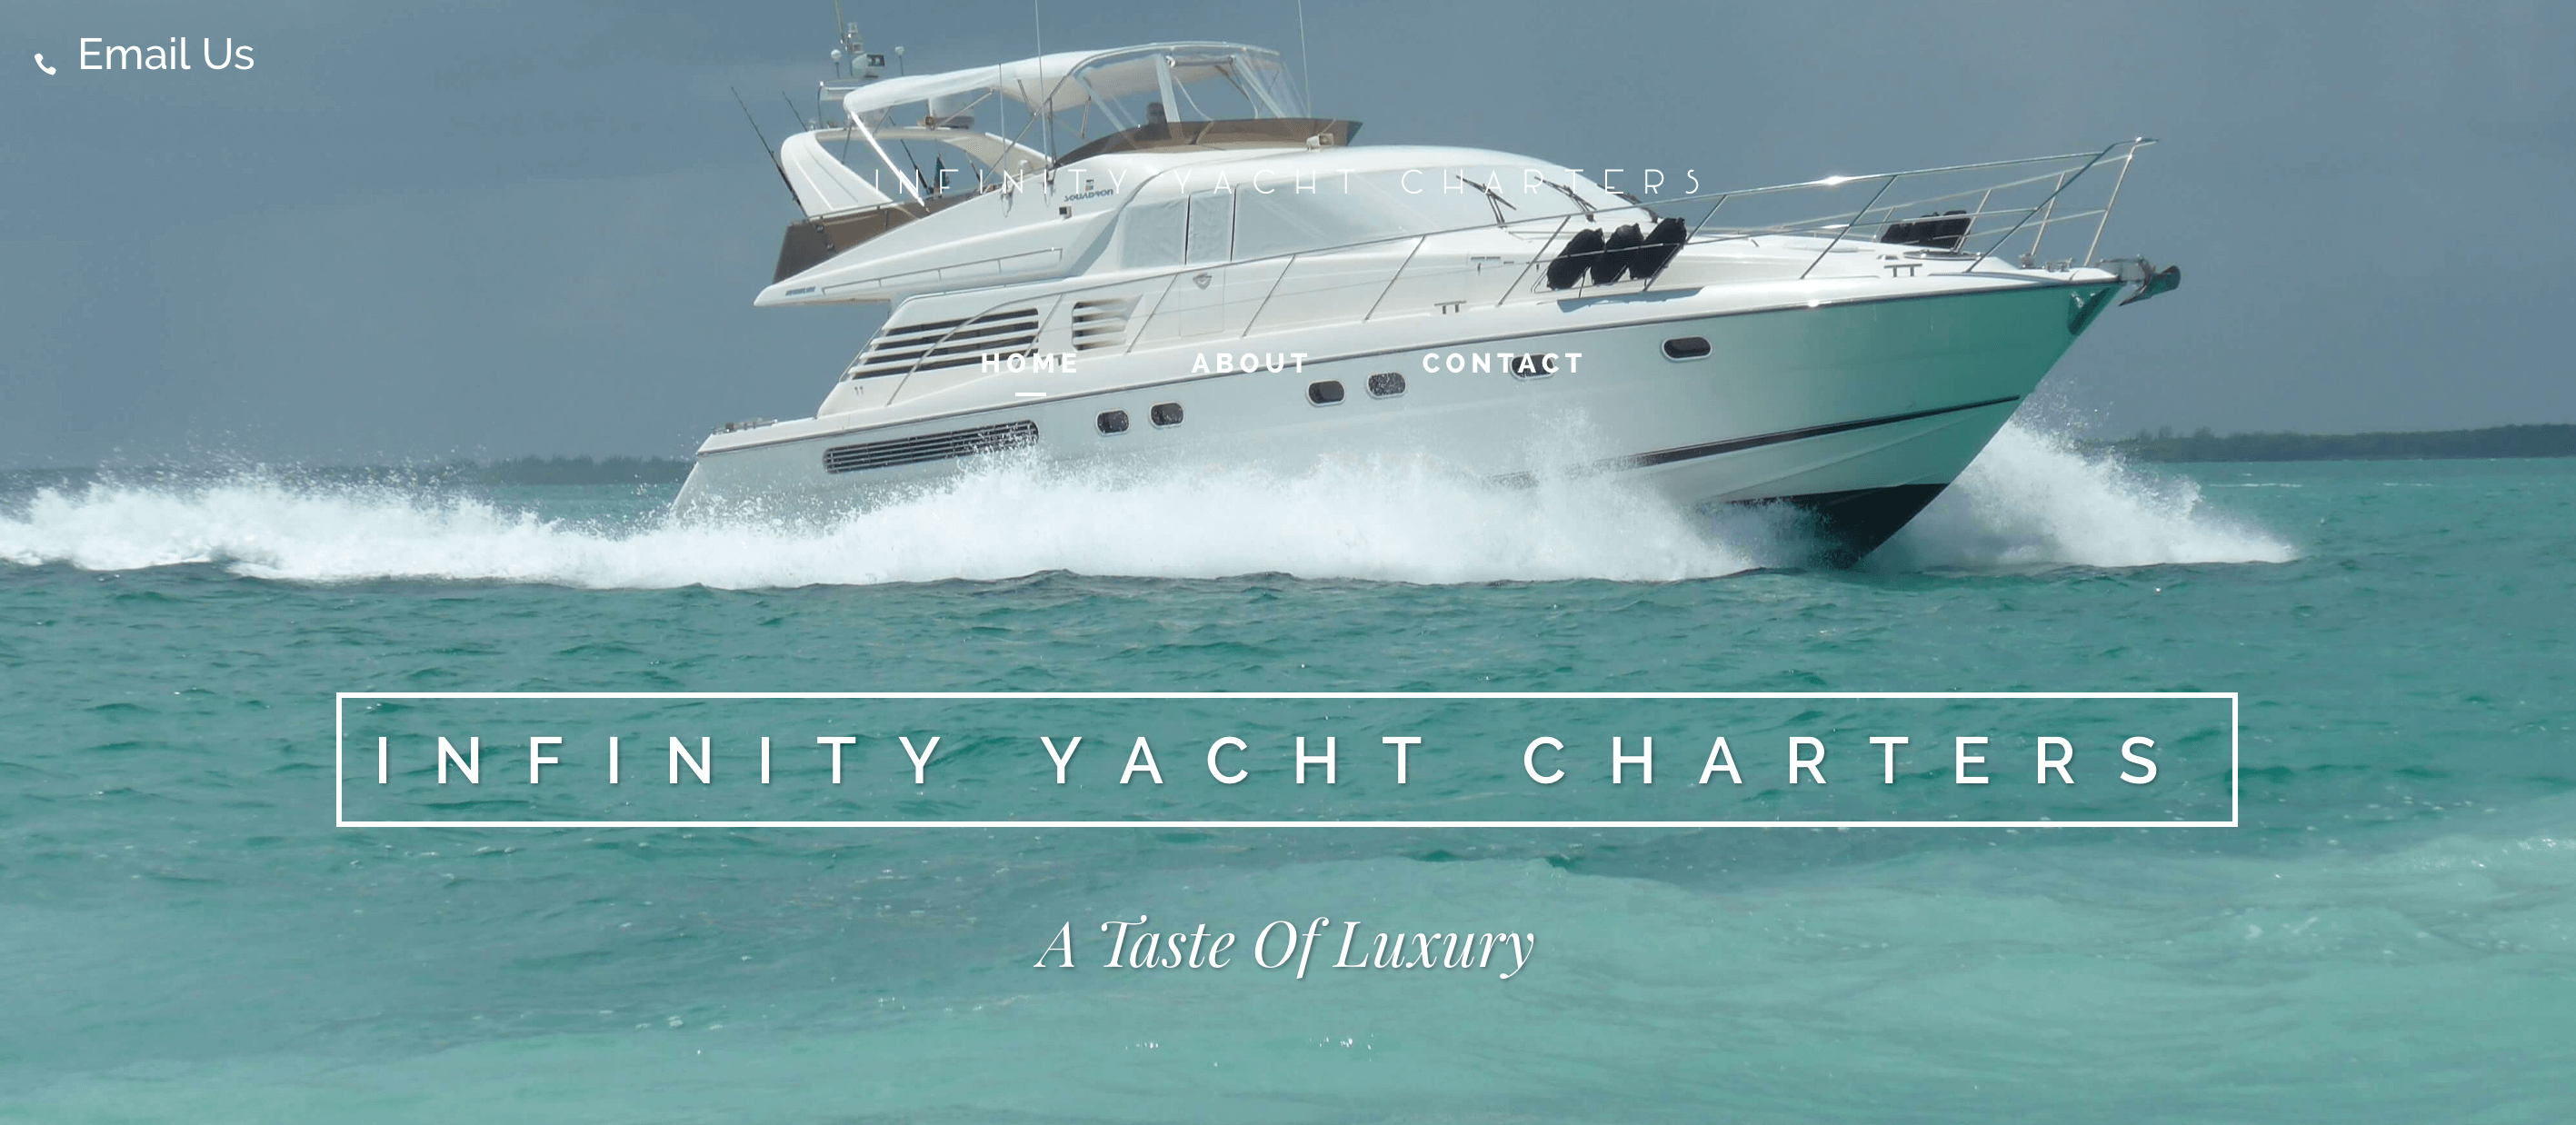 Infinity Yacht Charters - The Chase Design